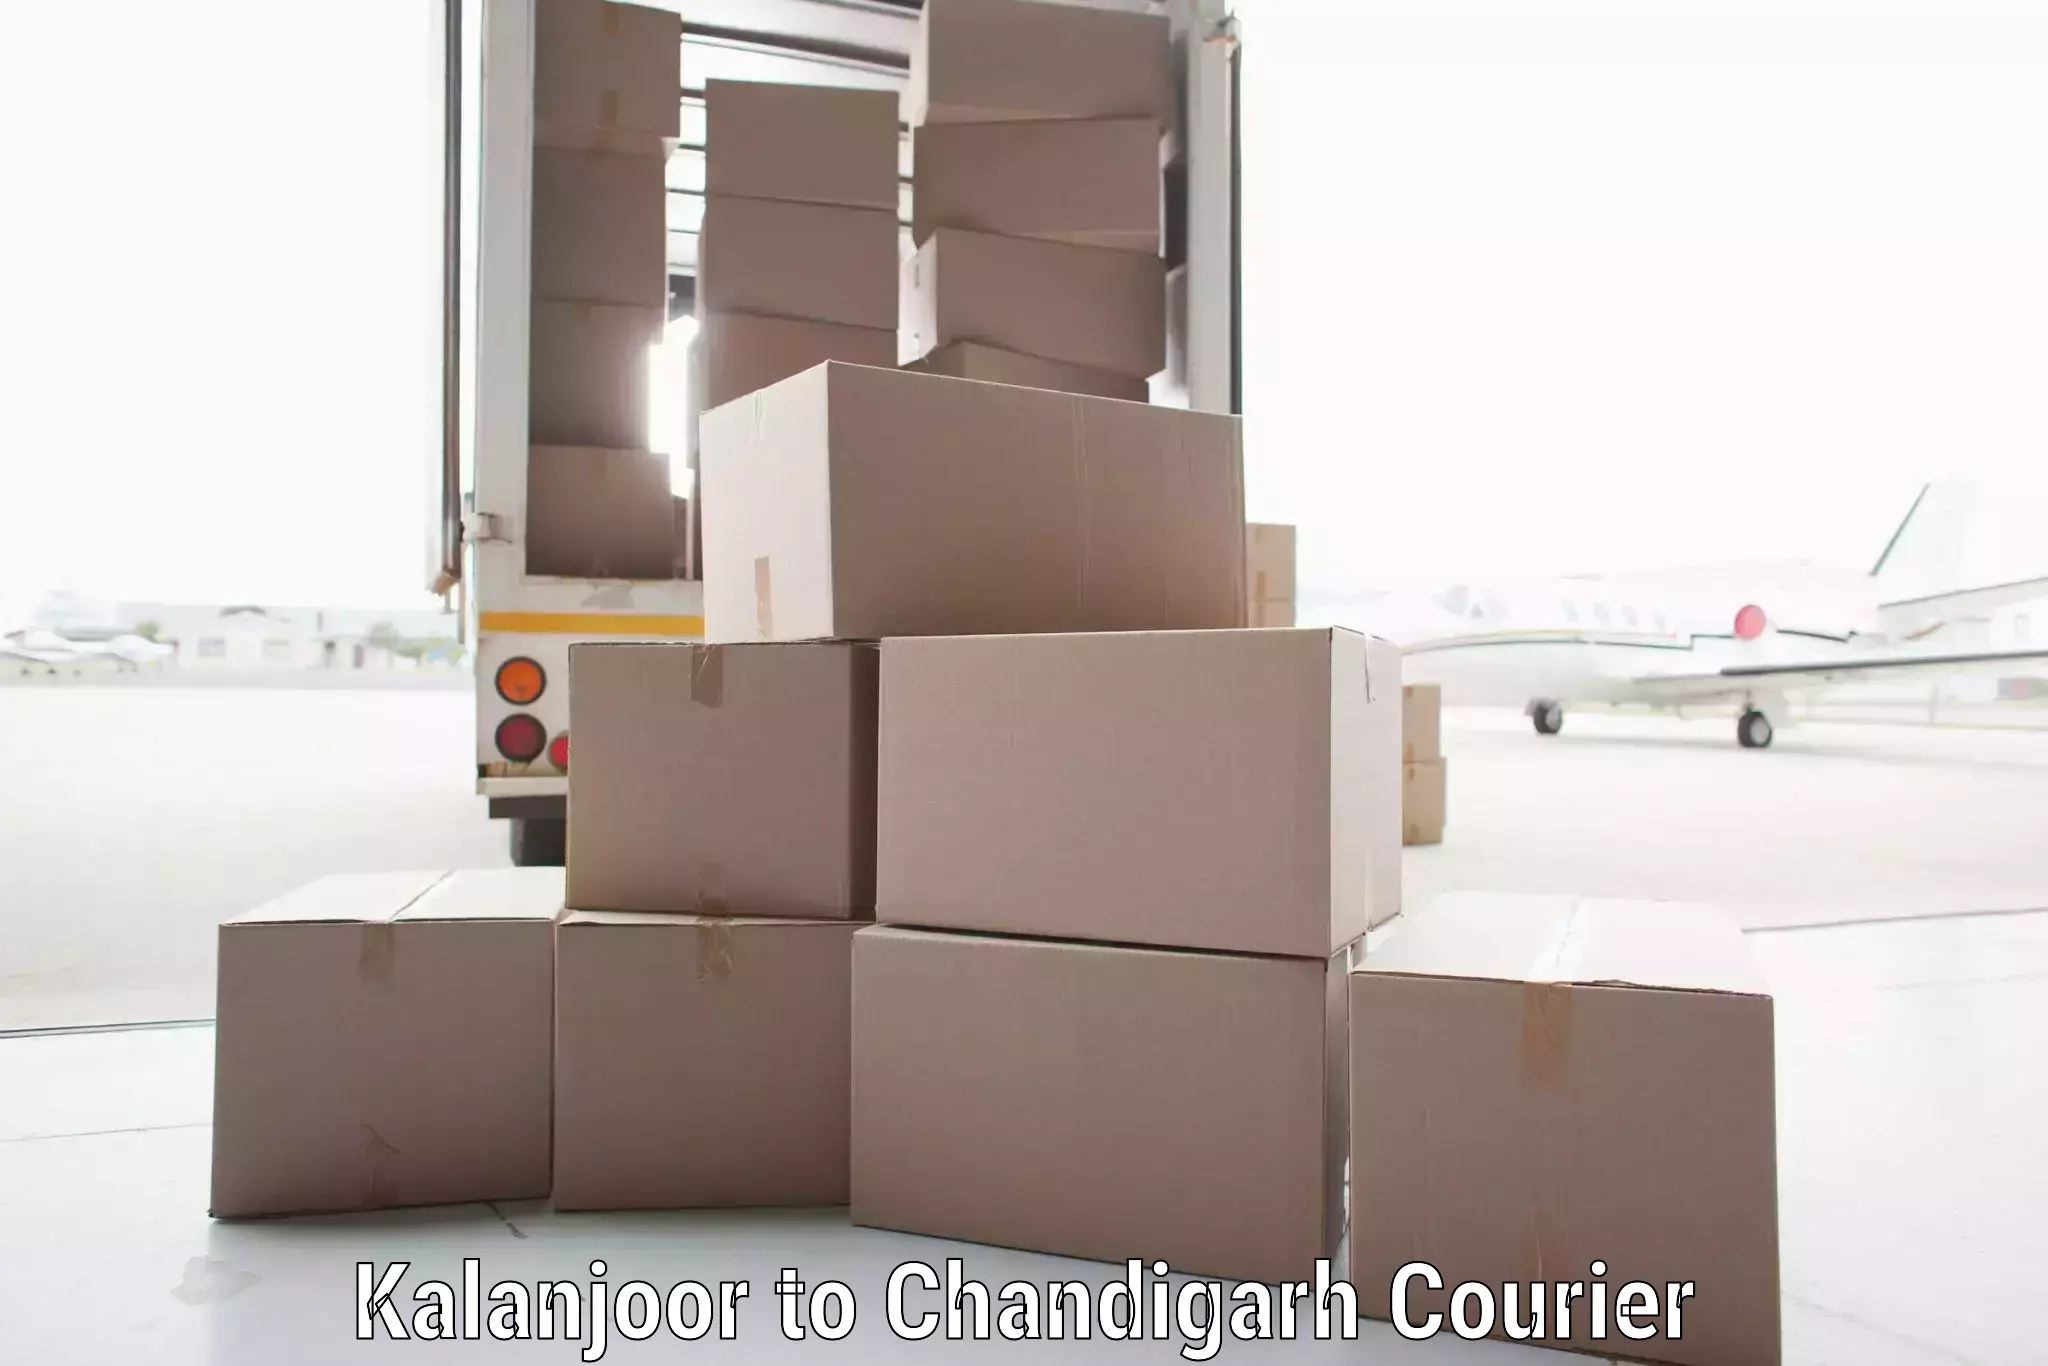 Global freight services Kalanjoor to Chandigarh